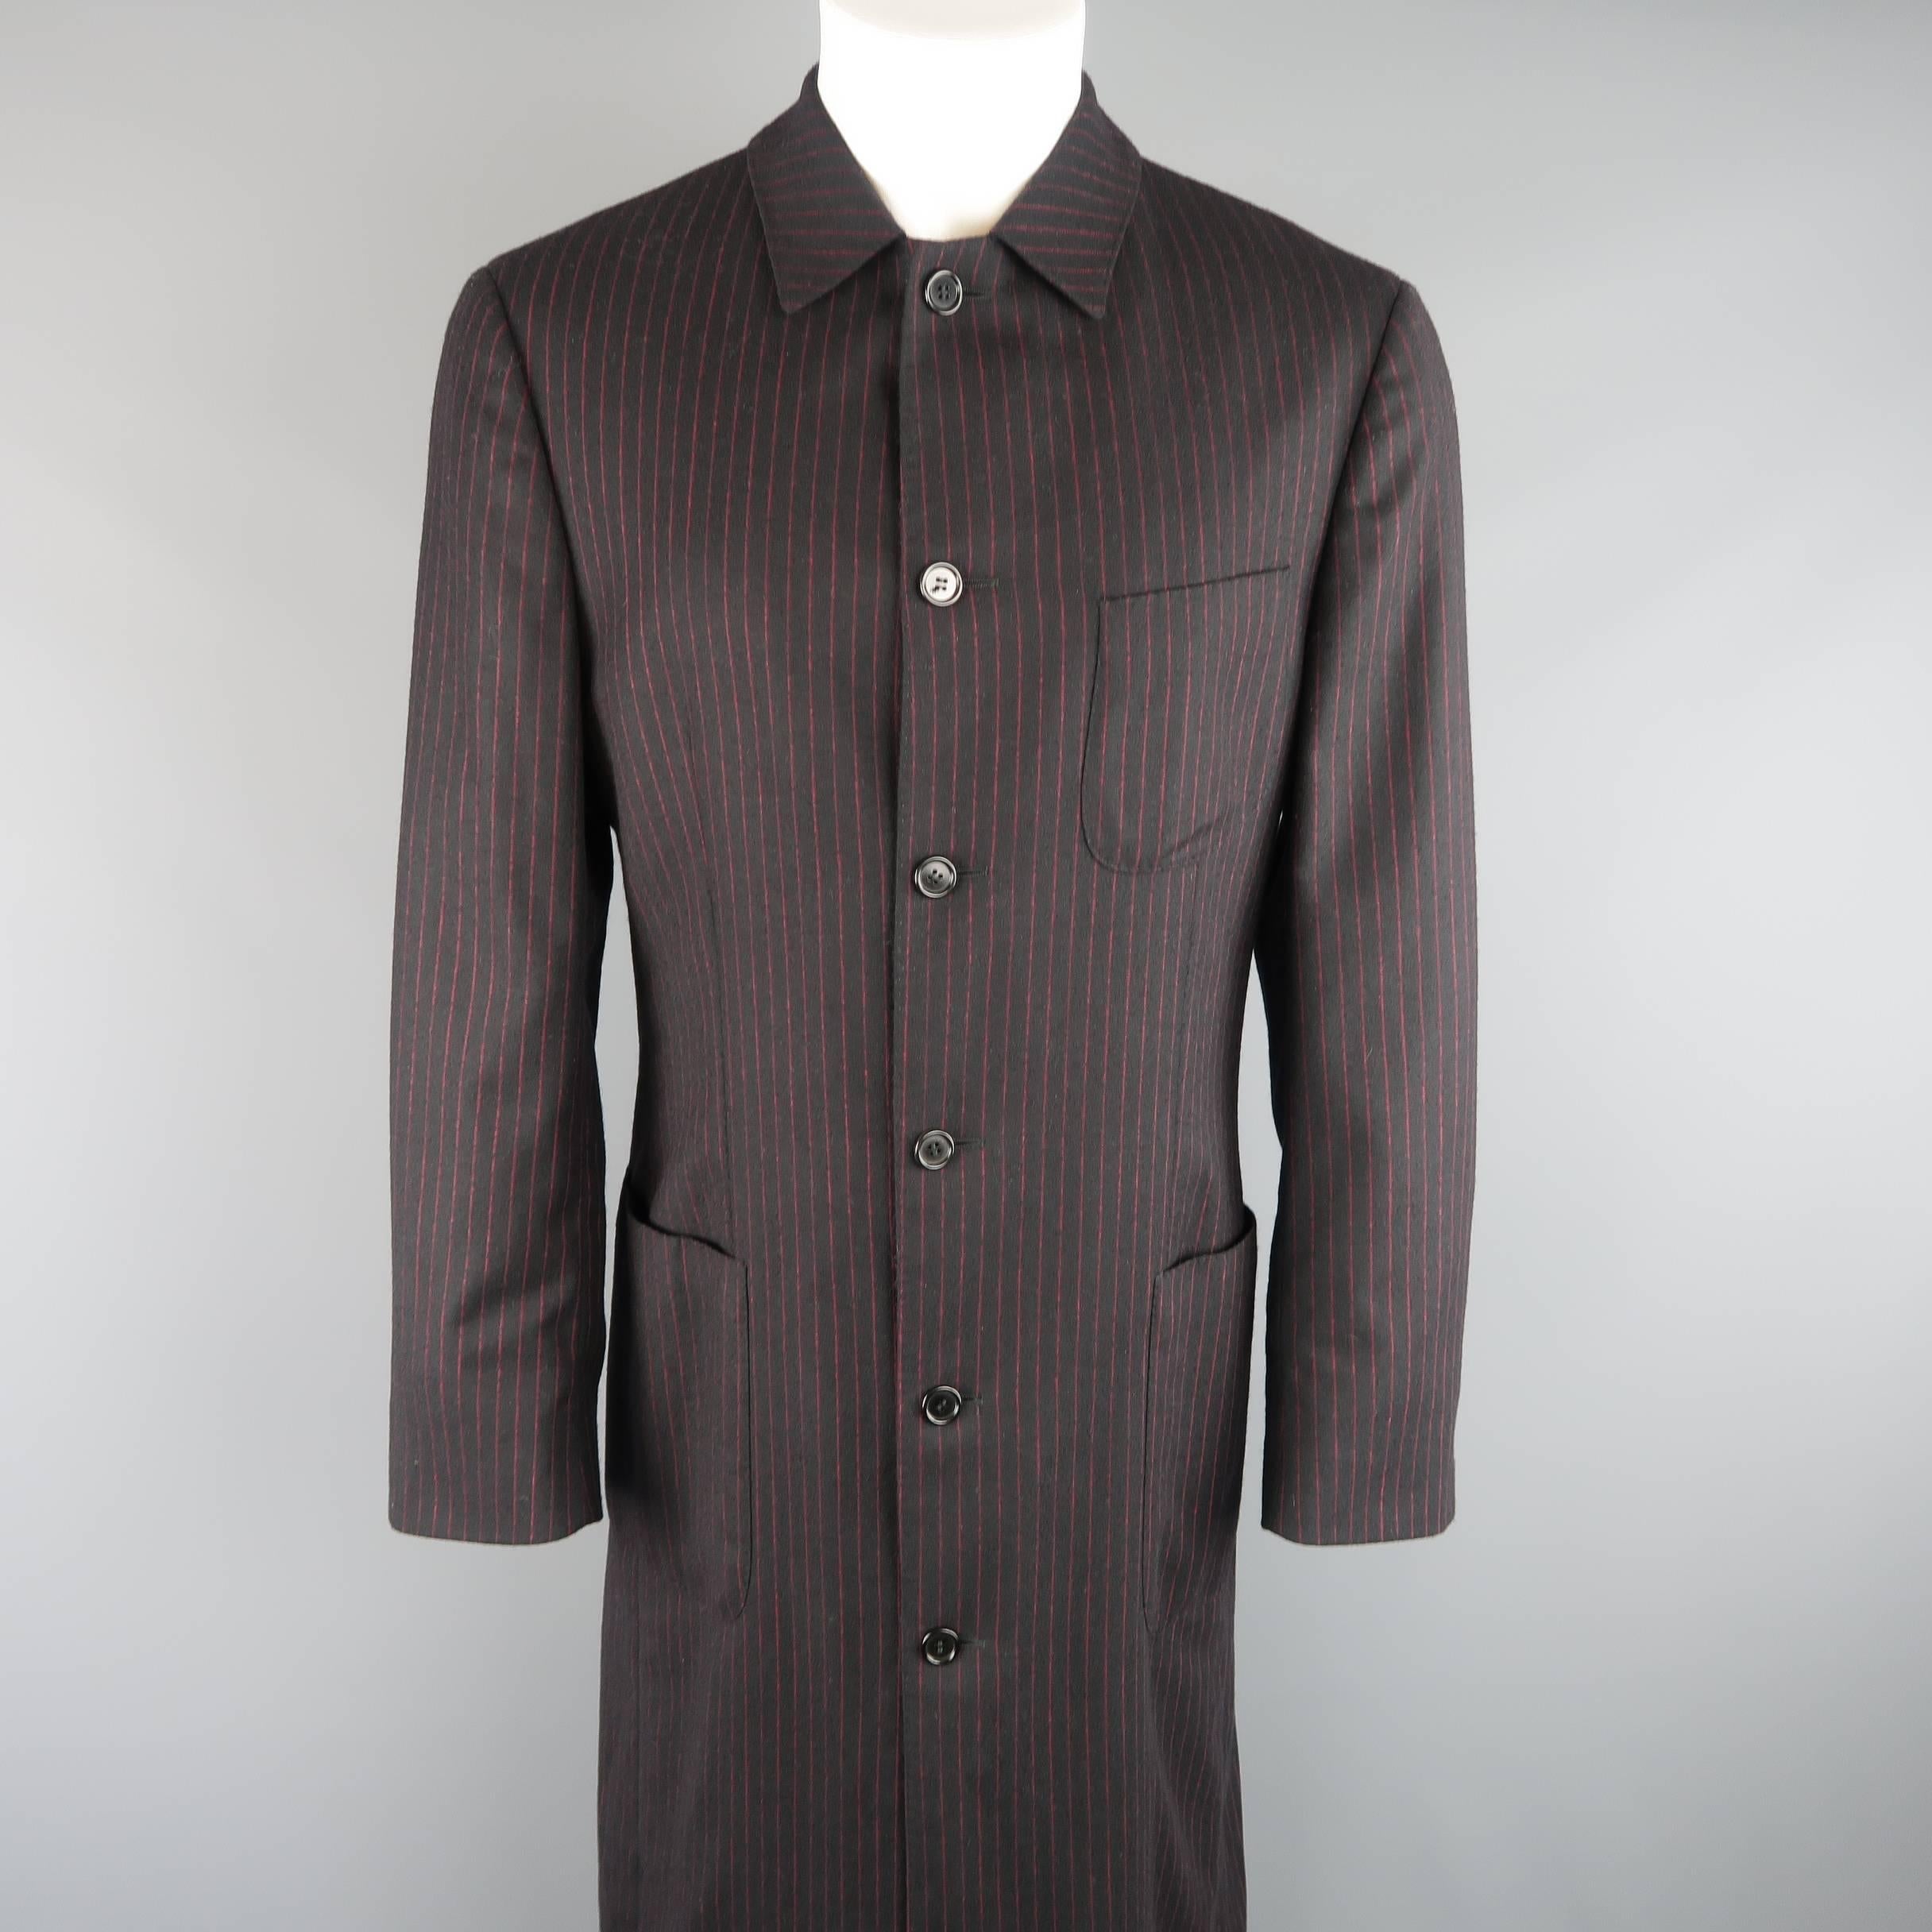 Archive ROMEO GIGLI coat comes in black and red pinstripe wool and features a classic pointed collar, six button front, patch pockets, button cuffs, and an extended, full length hemline.
 
Excellent Pre-Owned Condition.
Marked: IT 48
